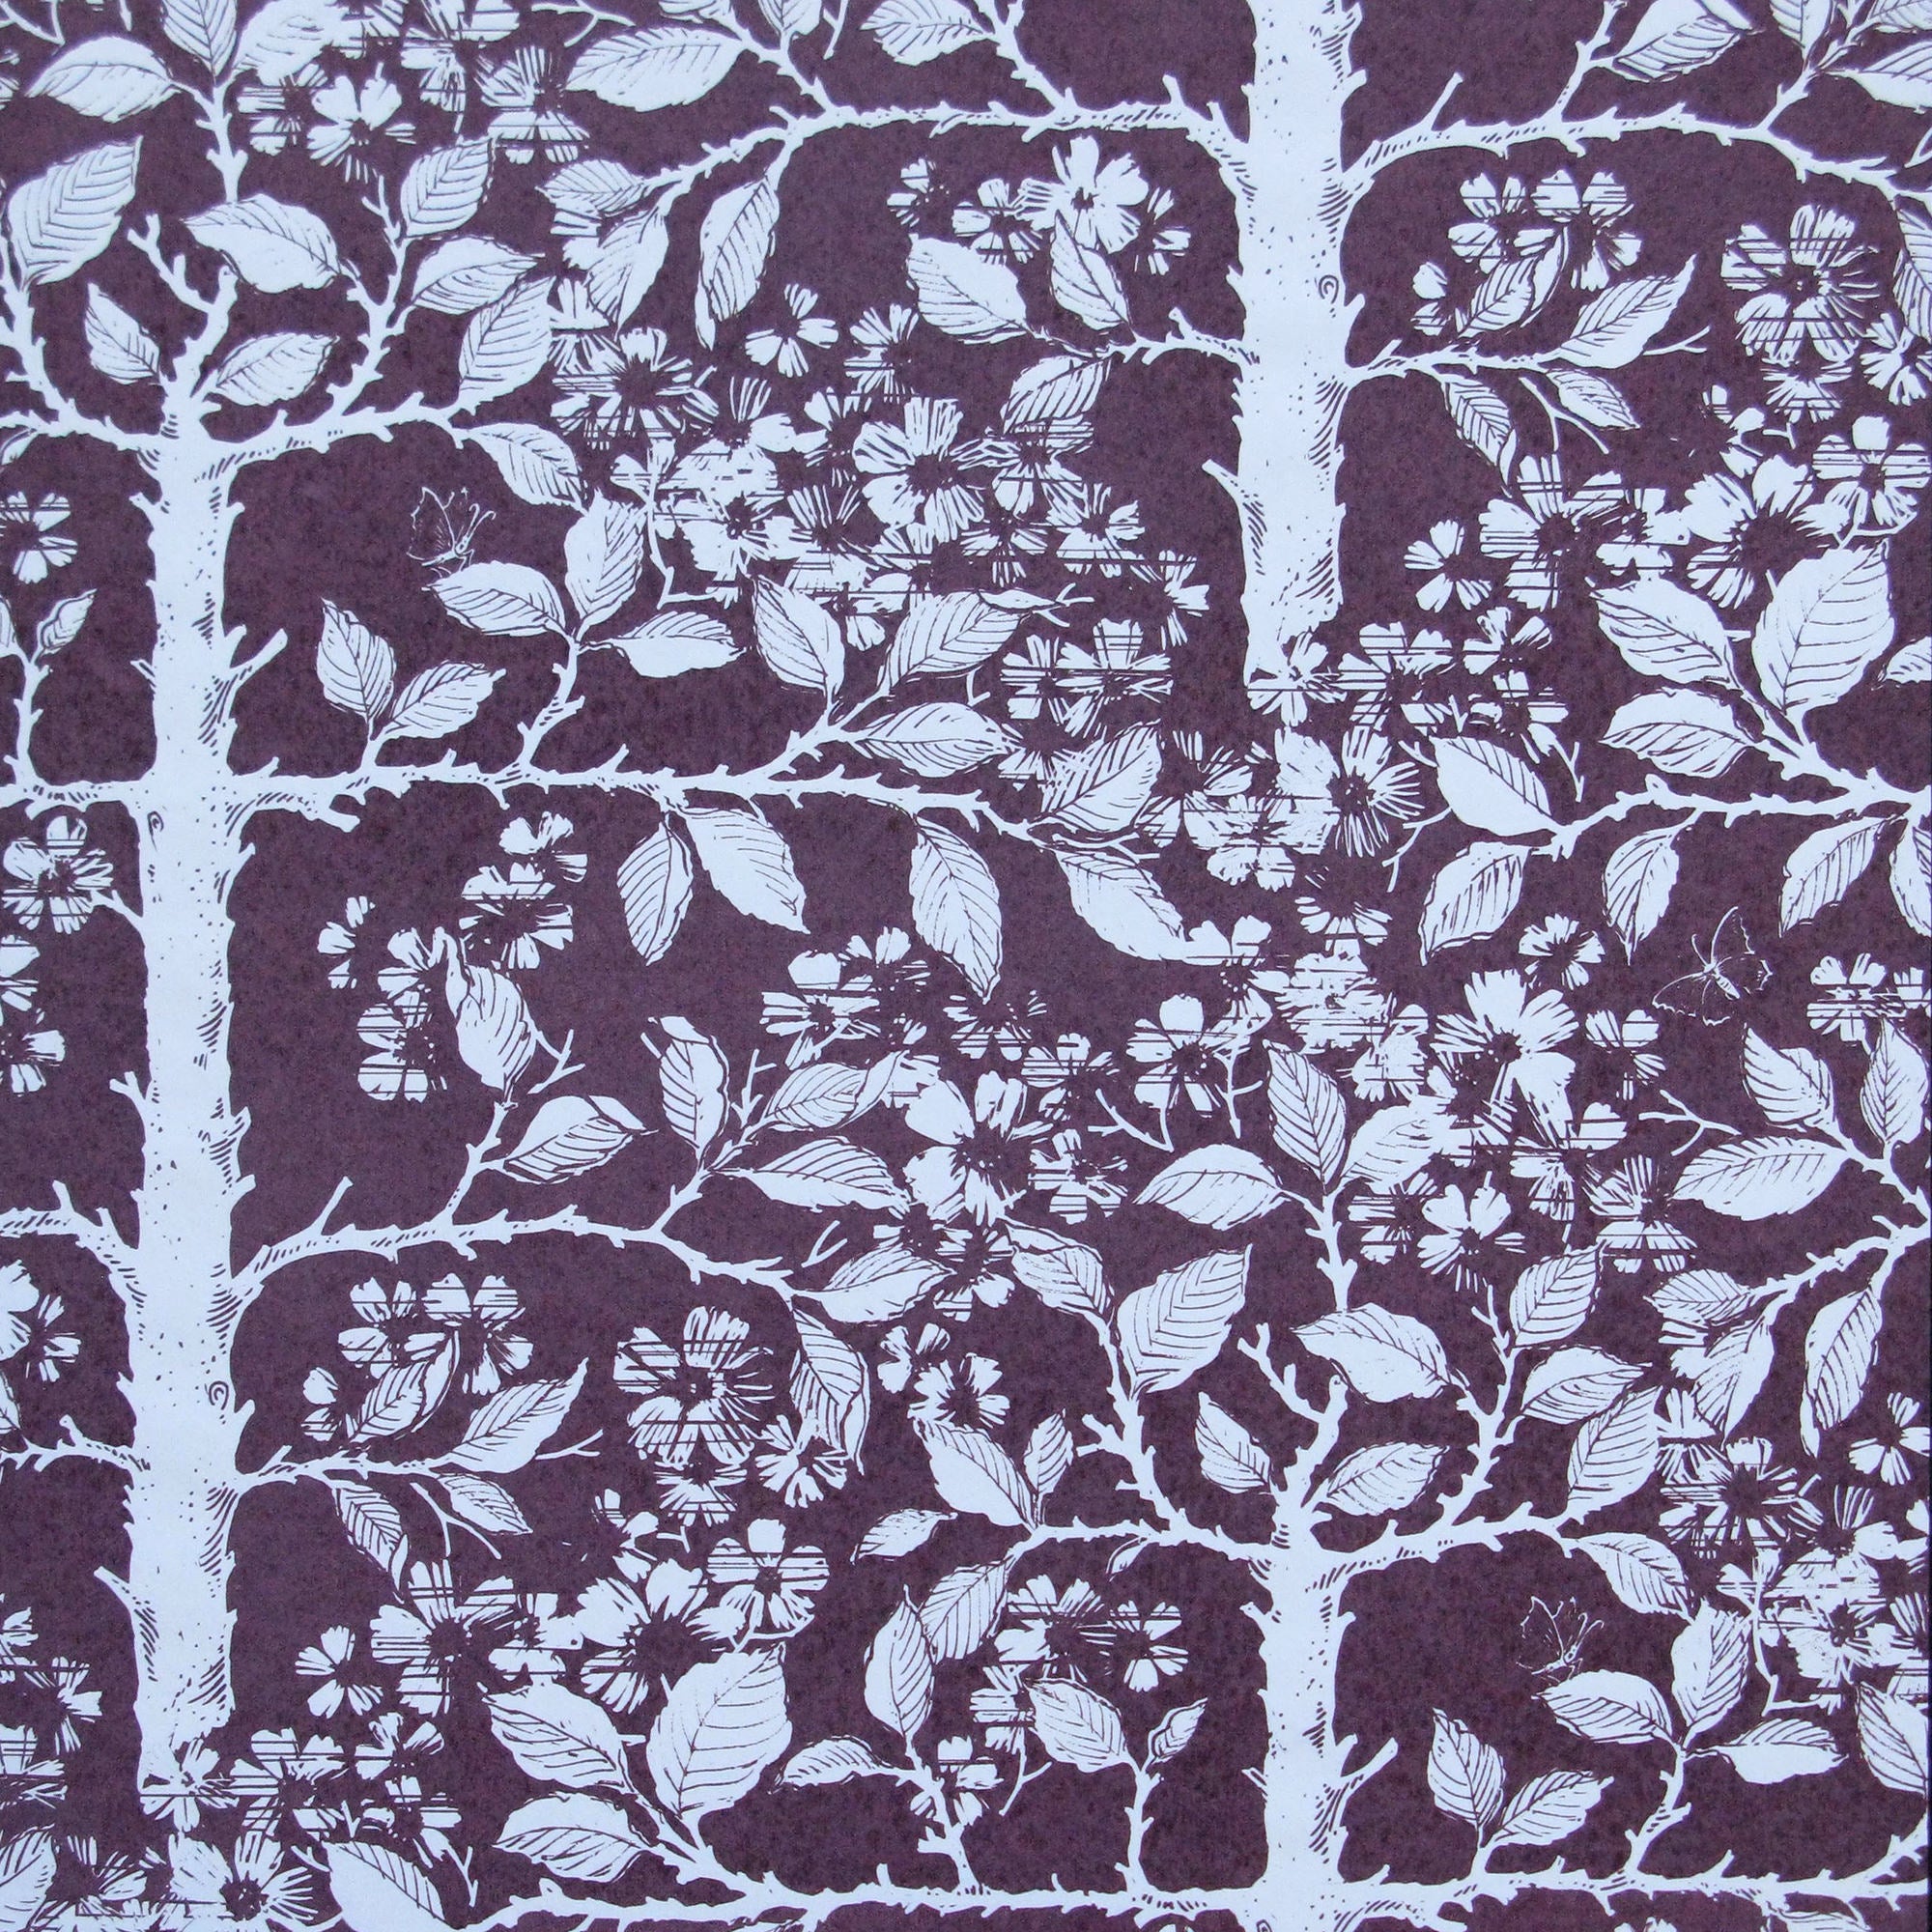 Detail of wallpaper in a large-scale tree and leaf print in white on a dark plum field.